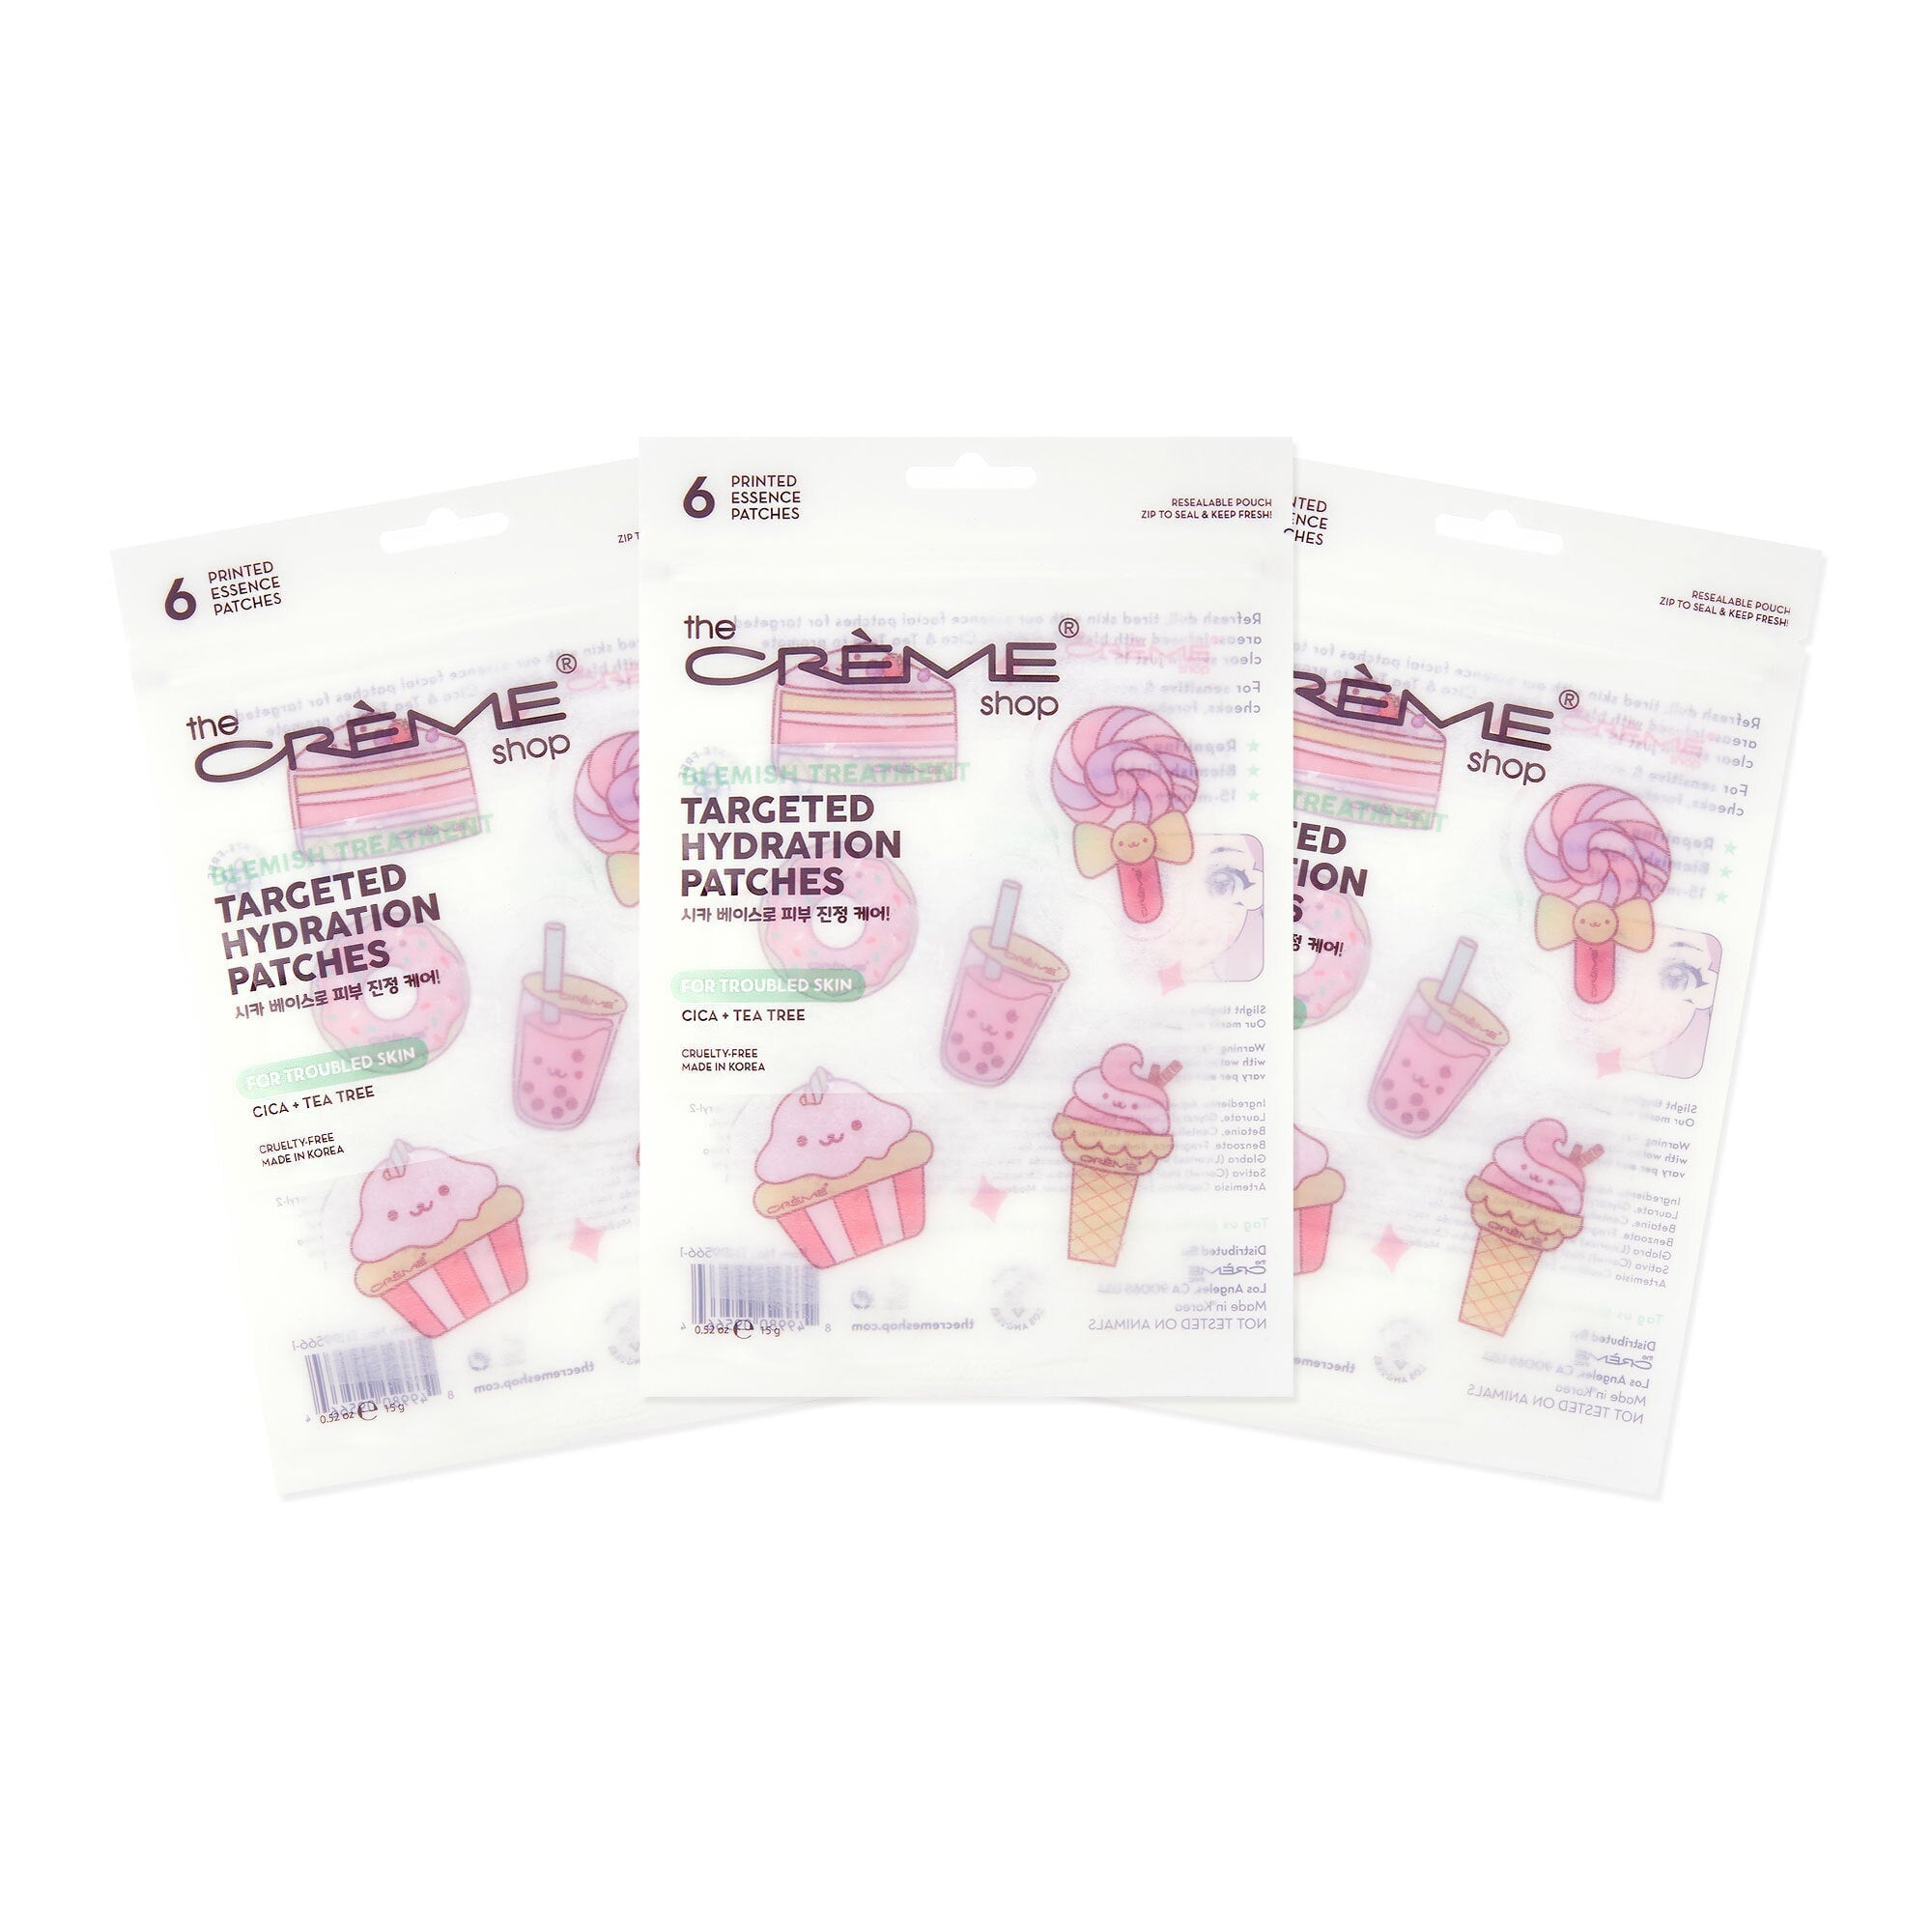 Targeted Hydration Patches For Acne Prone Skin - "Sweet Treats" (3 Pack) Patches The Crème Shop 